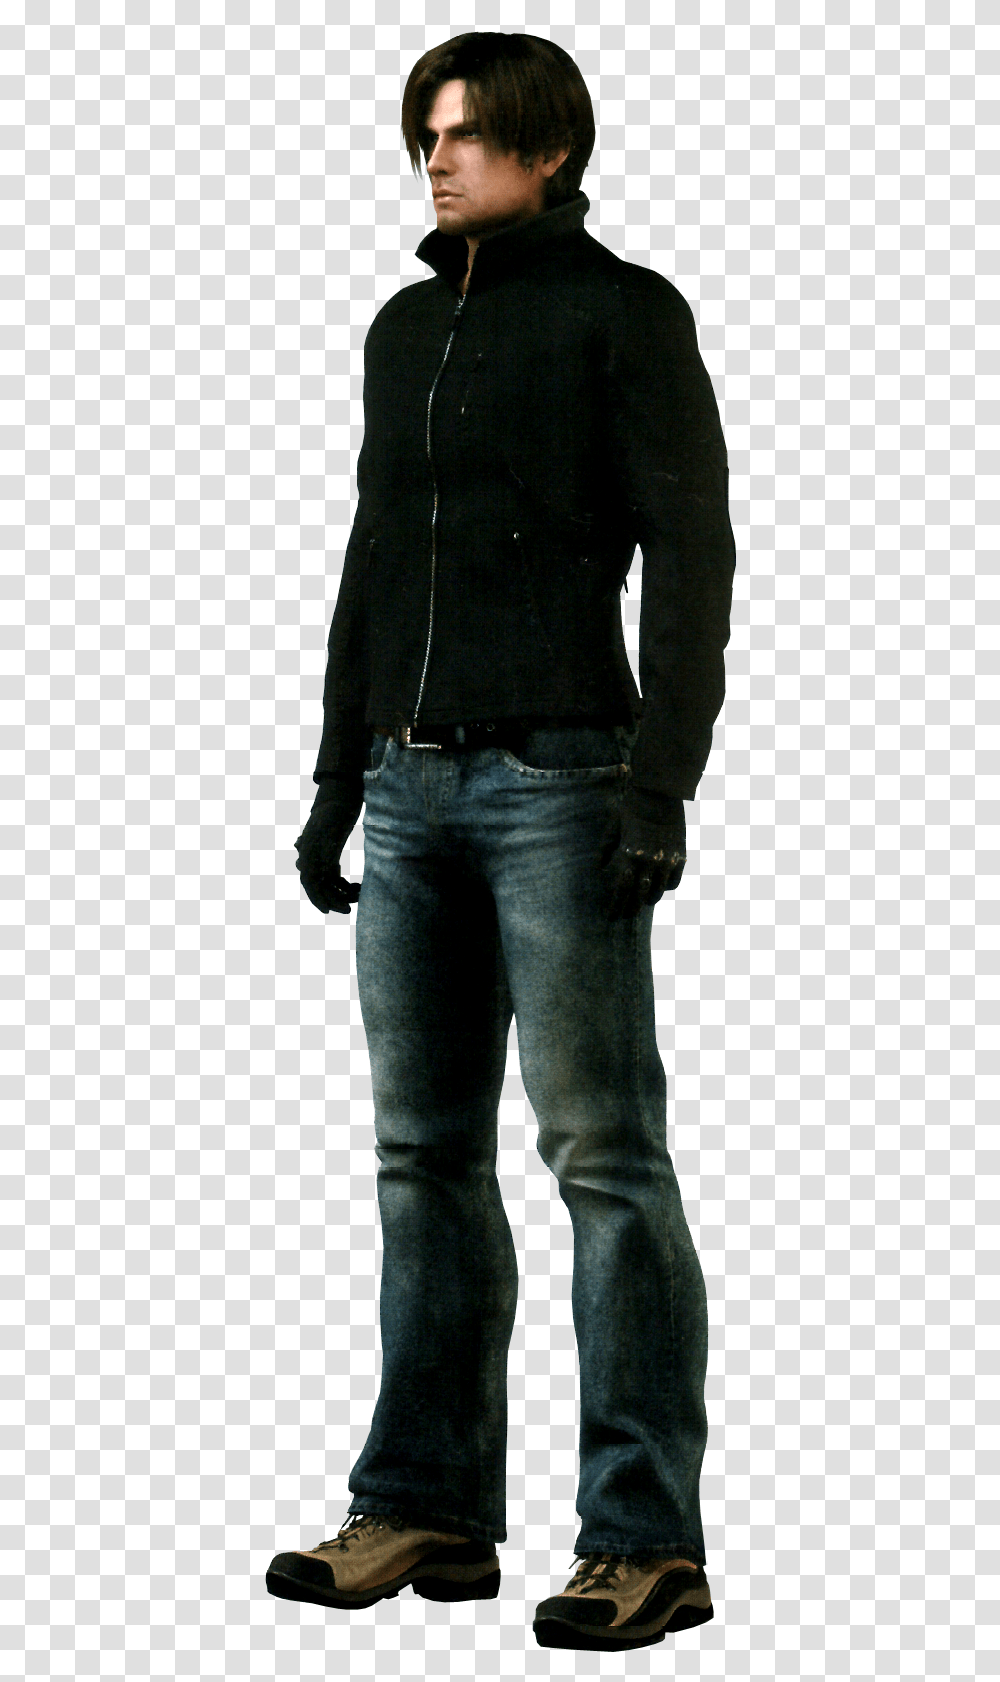 Kennedy Image Leon S Kennedy Damnation, Pants, Person, Jeans Transparent Png